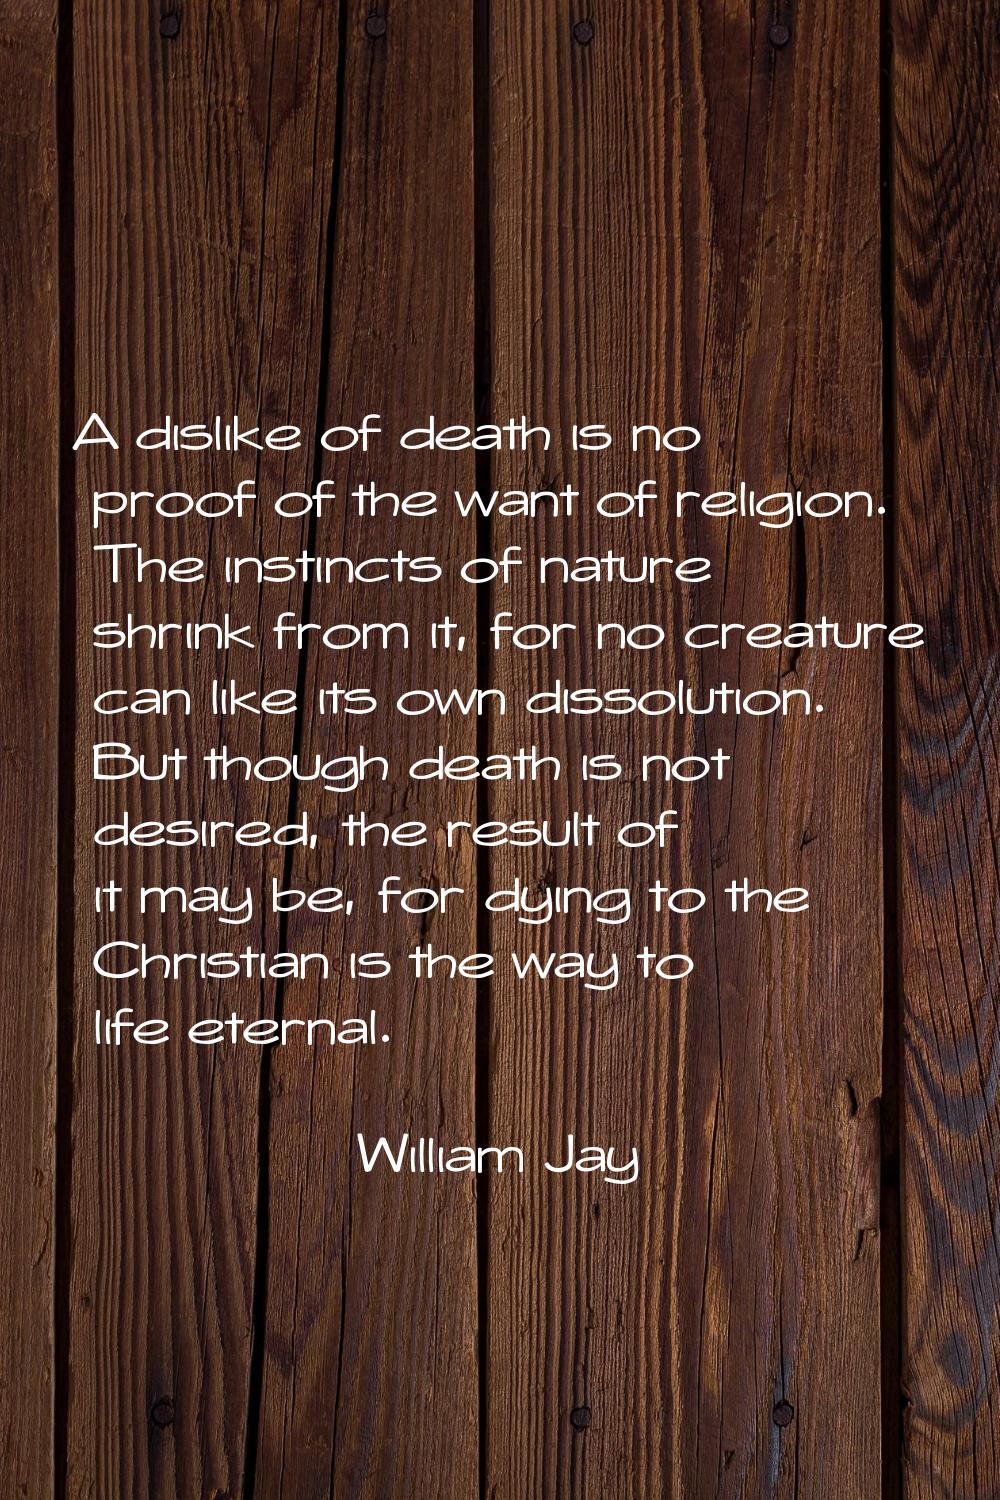 A dislike of death is no proof of the want of religion. The instincts of nature shrink from it, for